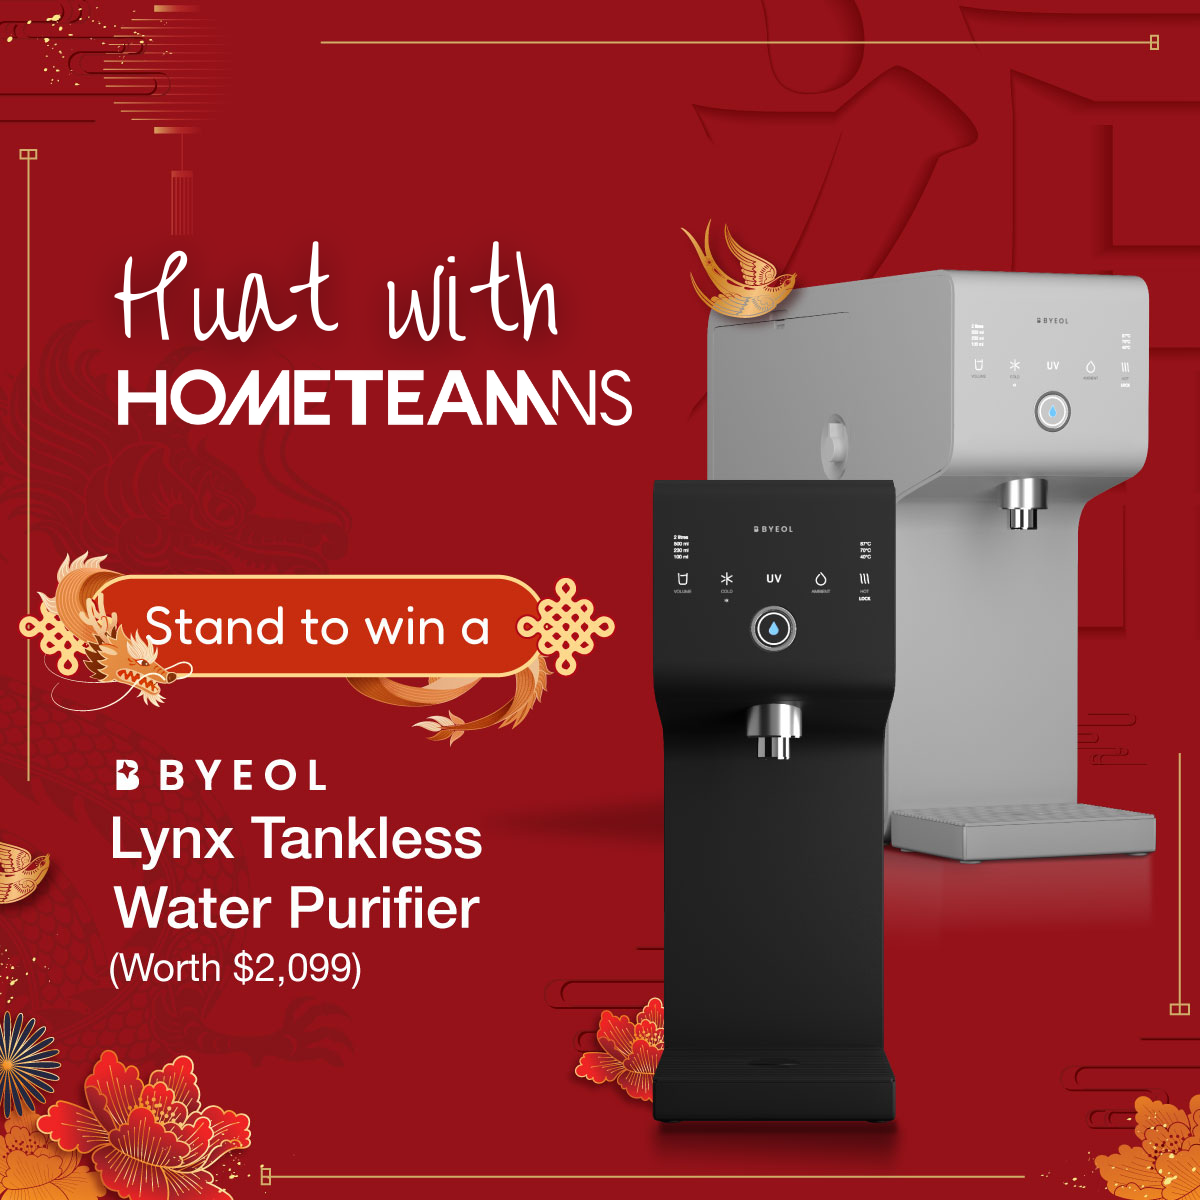 BBYEOL Lynx Tankless Hot & Cold Water Purifier Giveaway Giveaway post 2